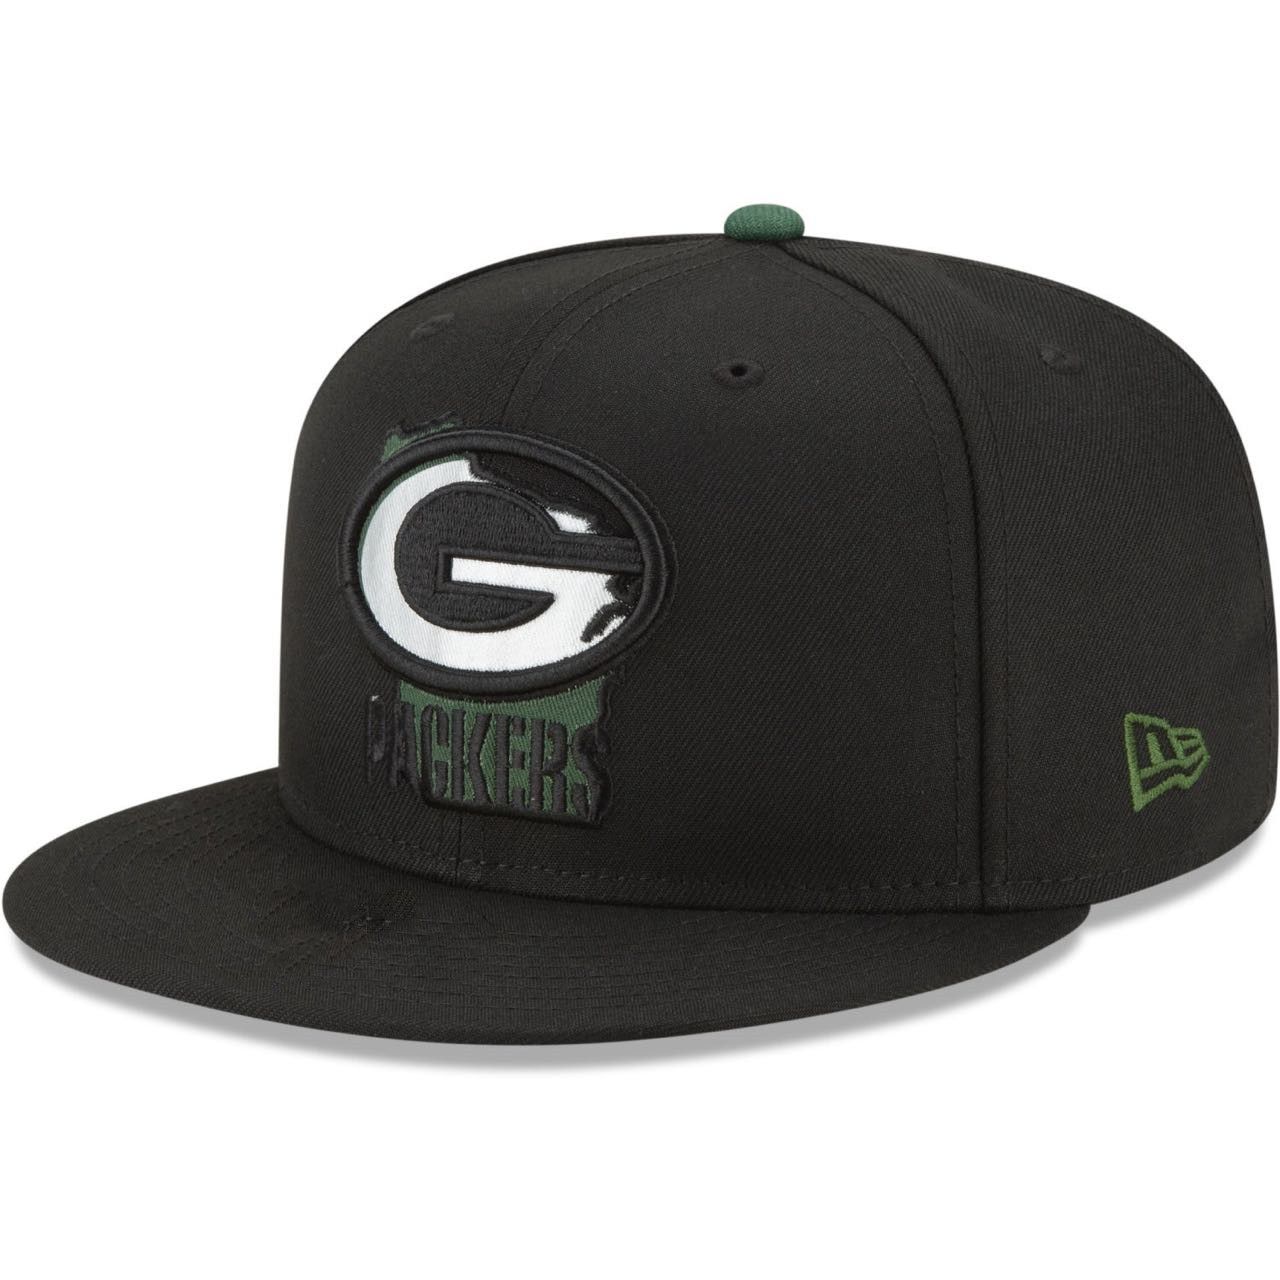 2023 NFL Green Bay Packers Hat TX 20230821